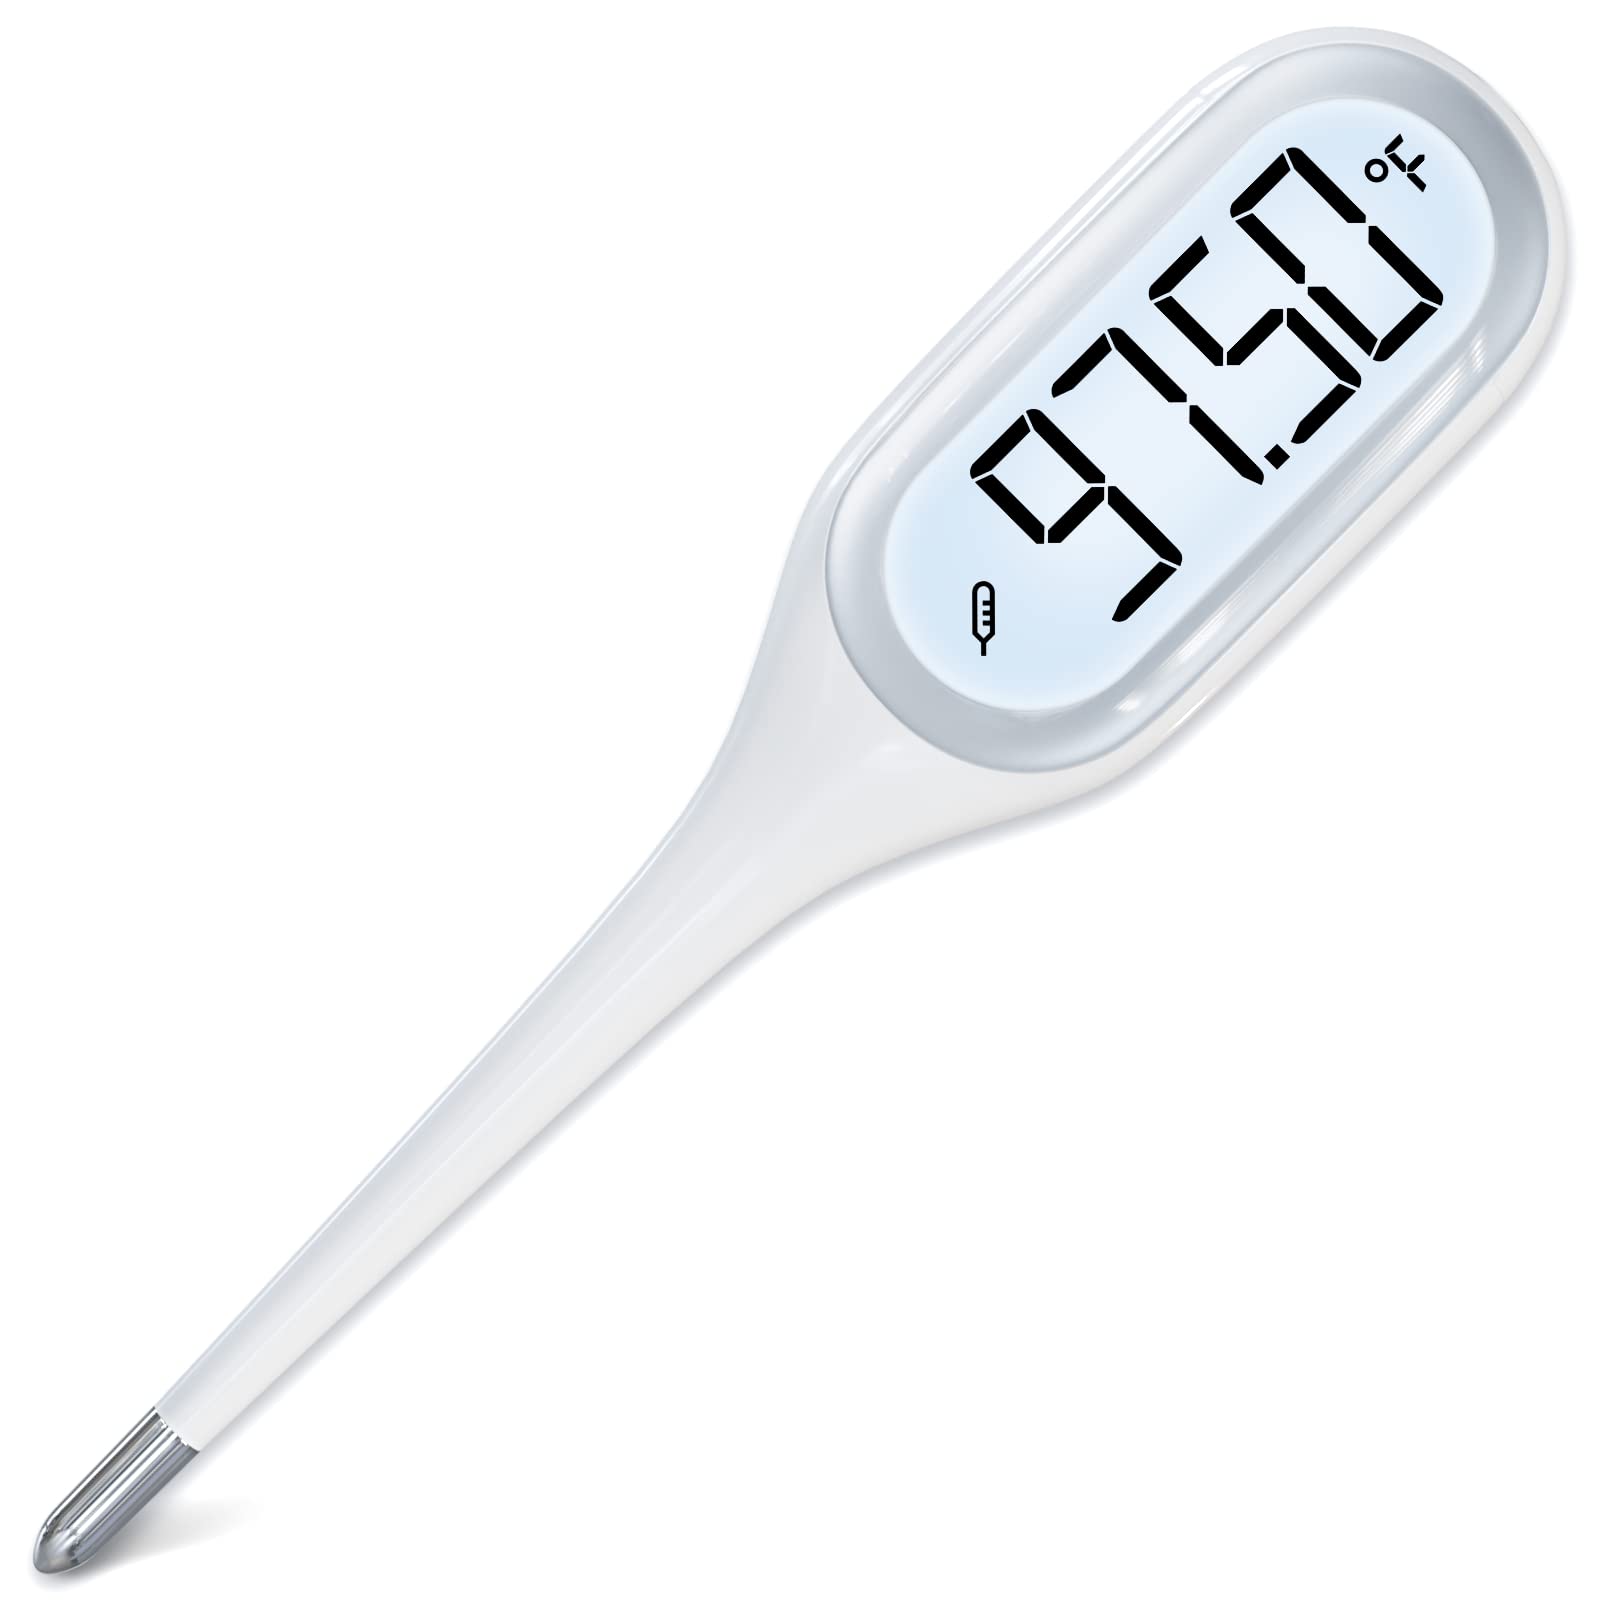 Easy@Home Digital Basal Thermometer, EBT-100, 1 - City Market